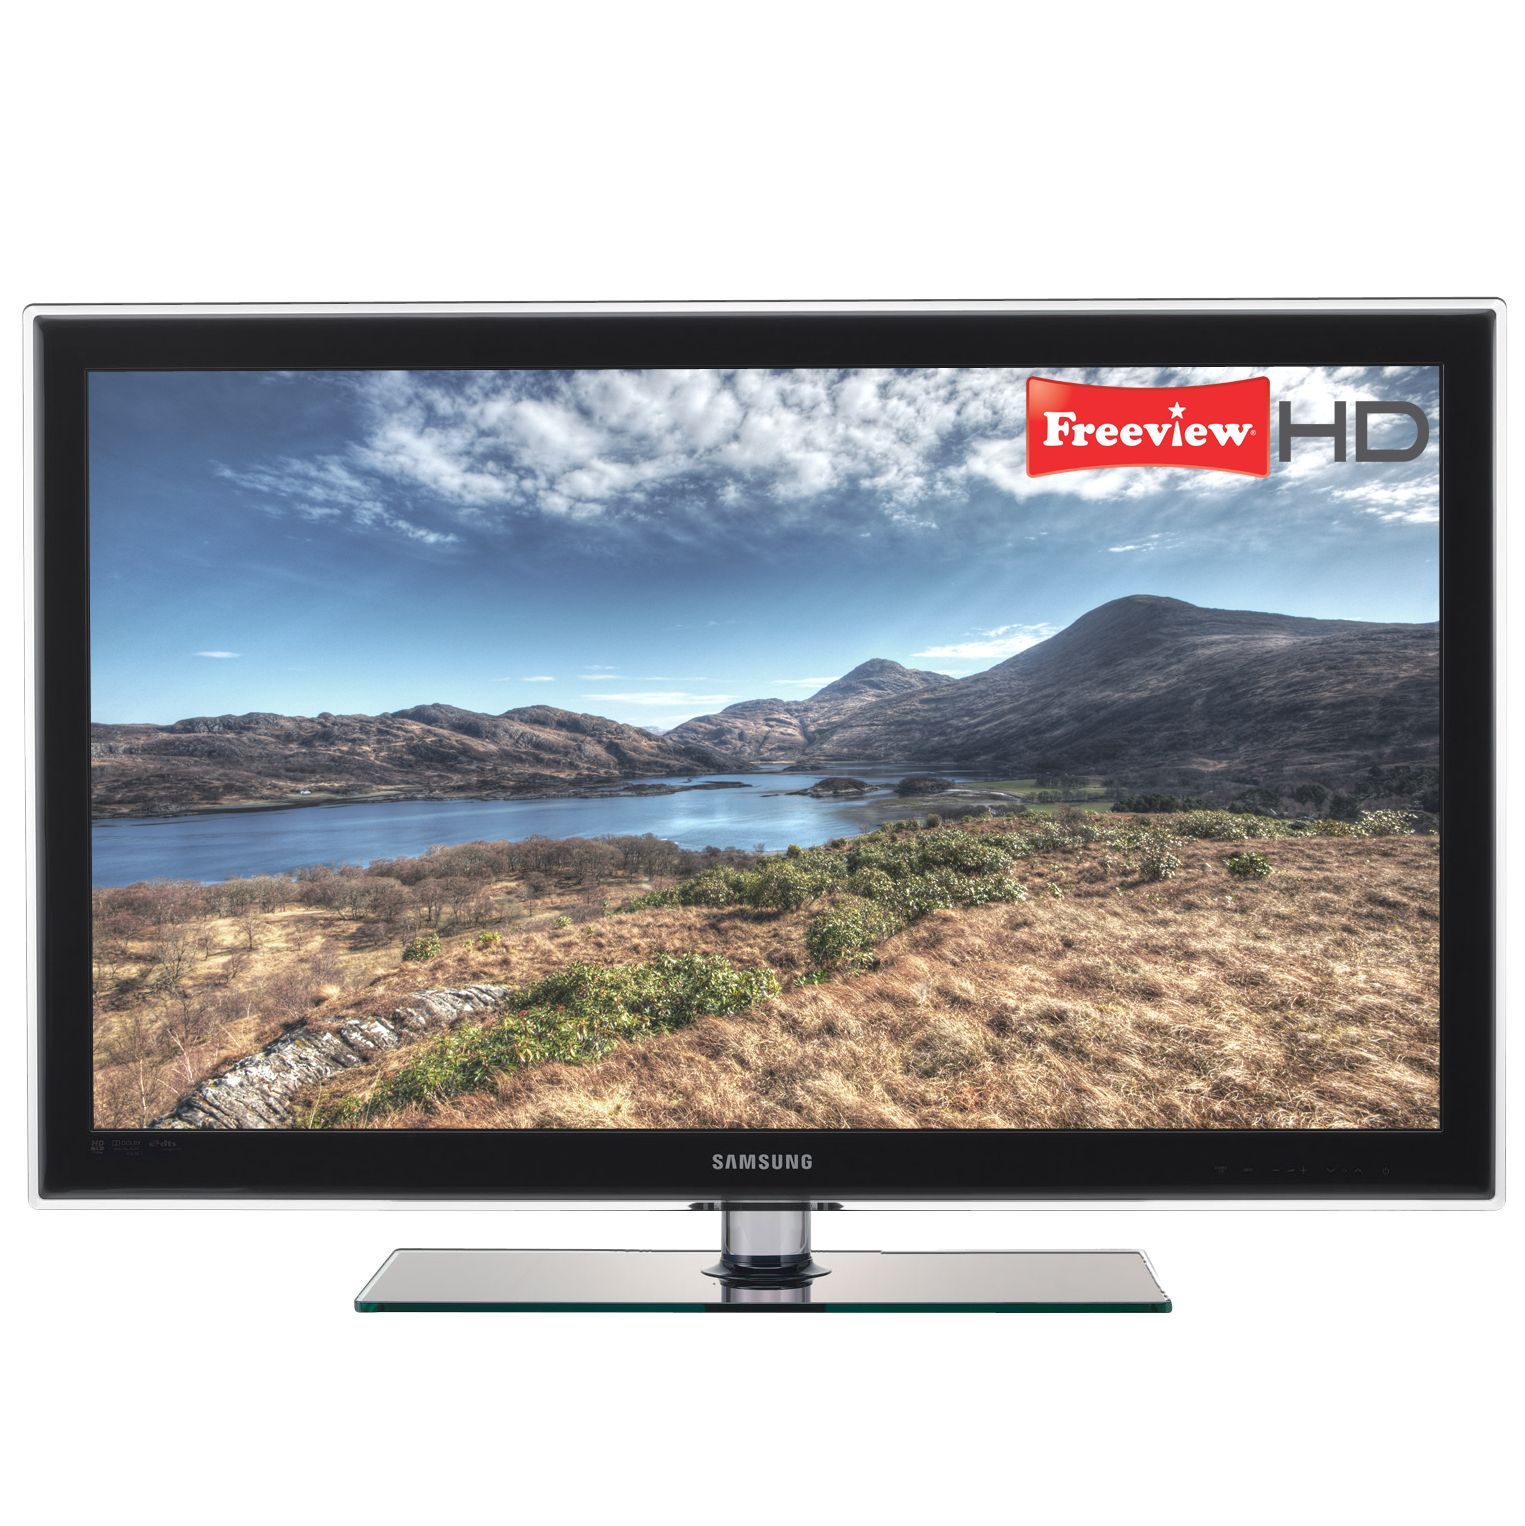 Samsung UE37C5800 LED HD 1080p Digital Television, 37 Inch with Built-in Freeview HD at JohnLewis